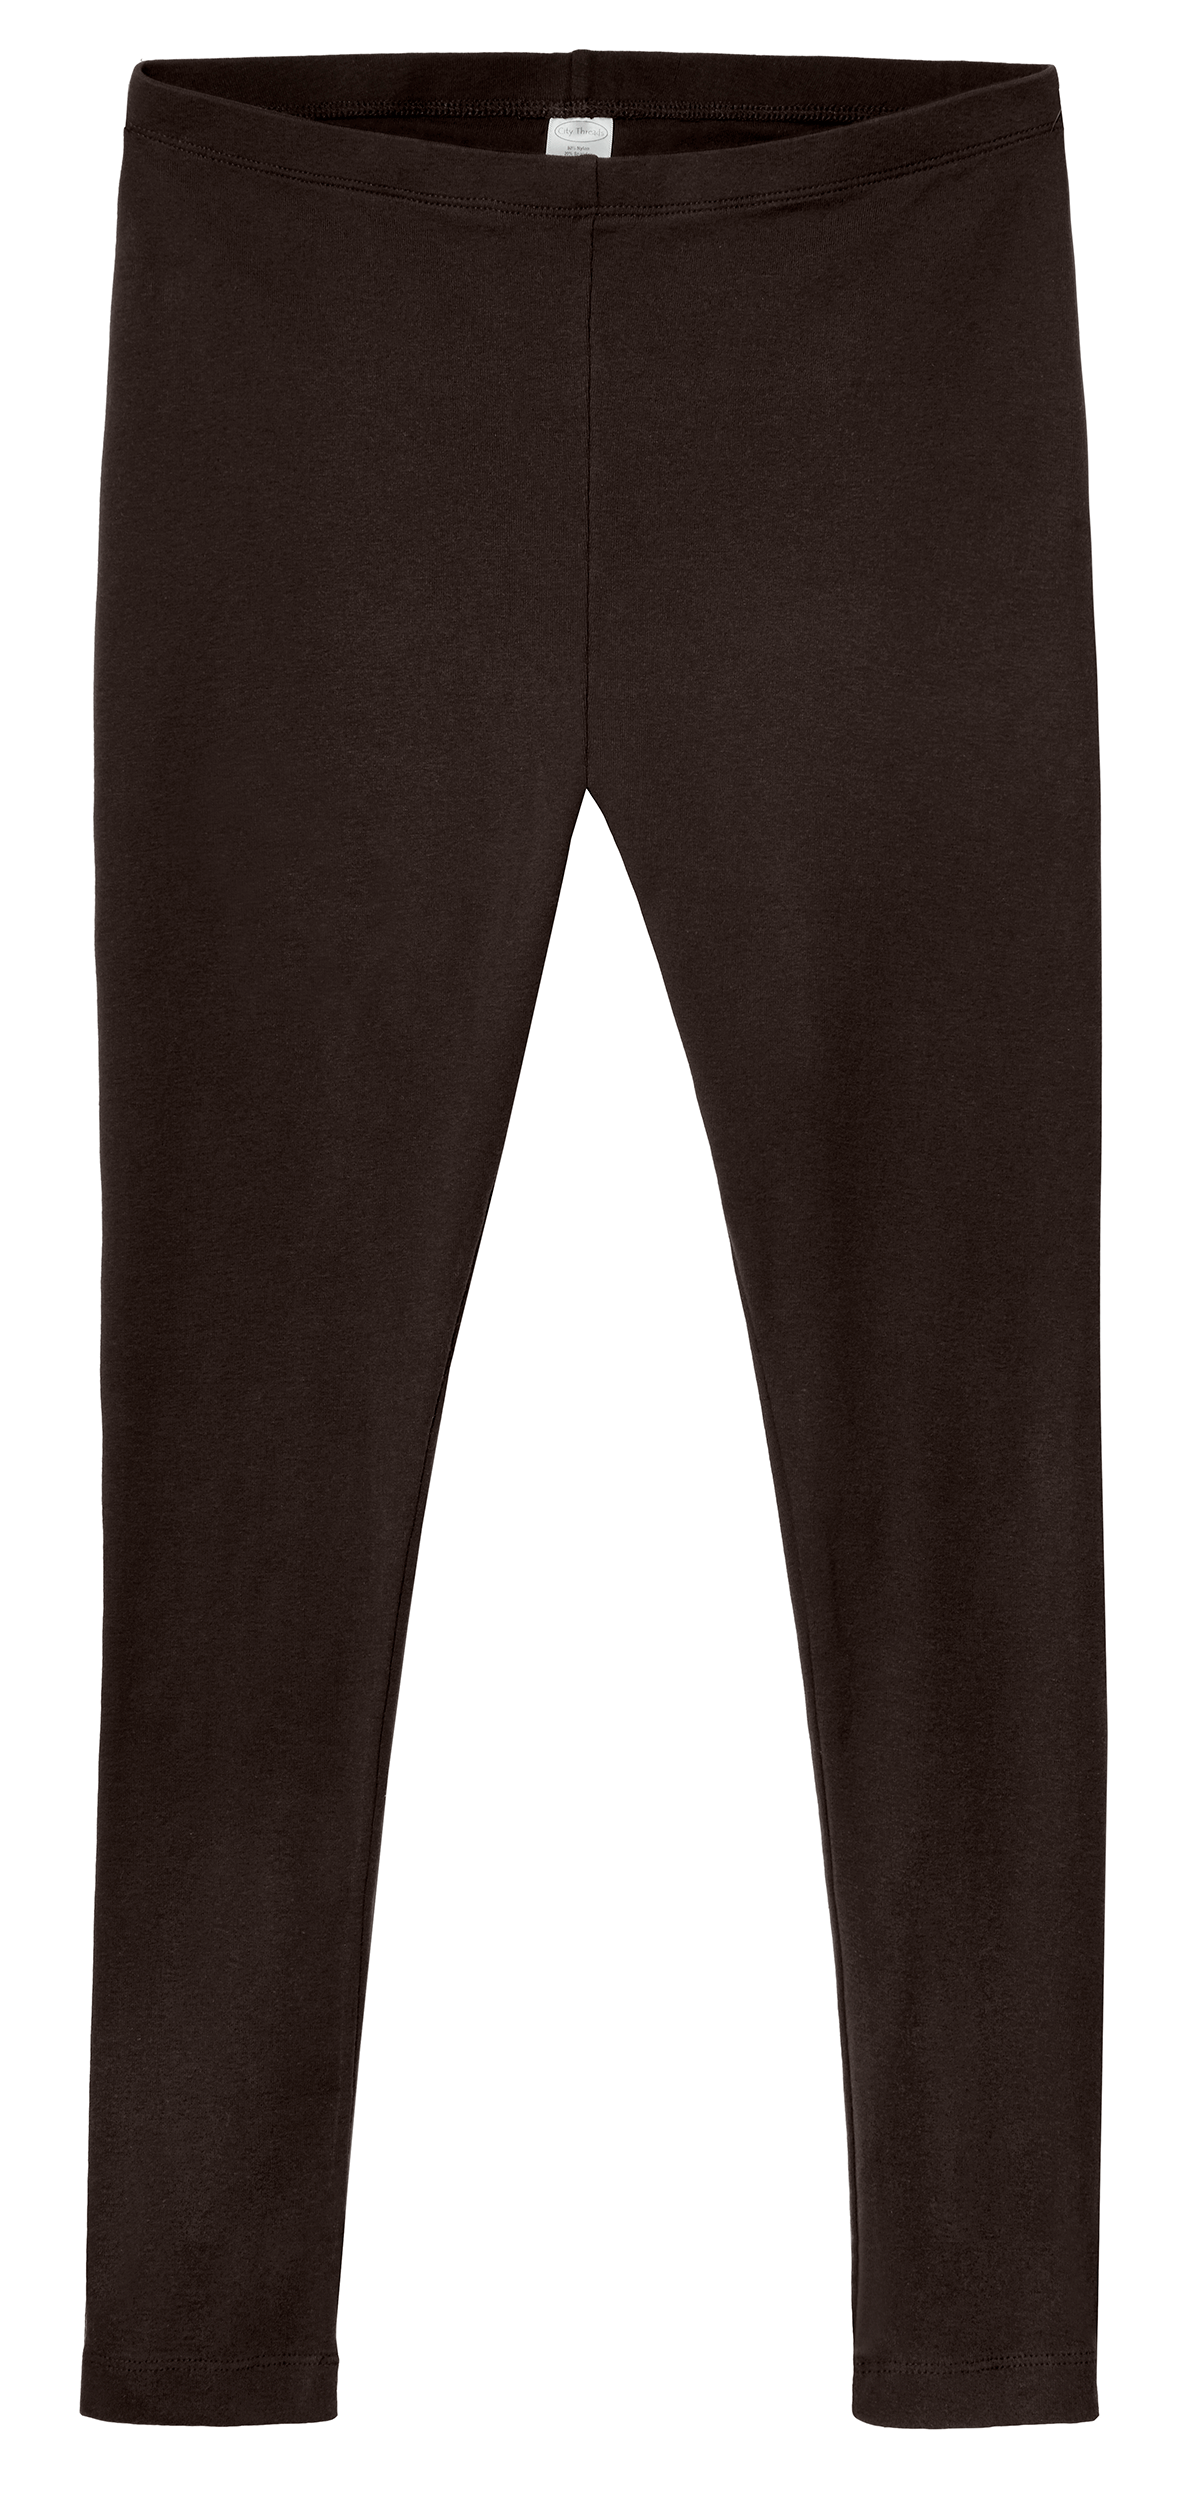 Wrap yourself in comfort with our 100% cotton leggings – soft